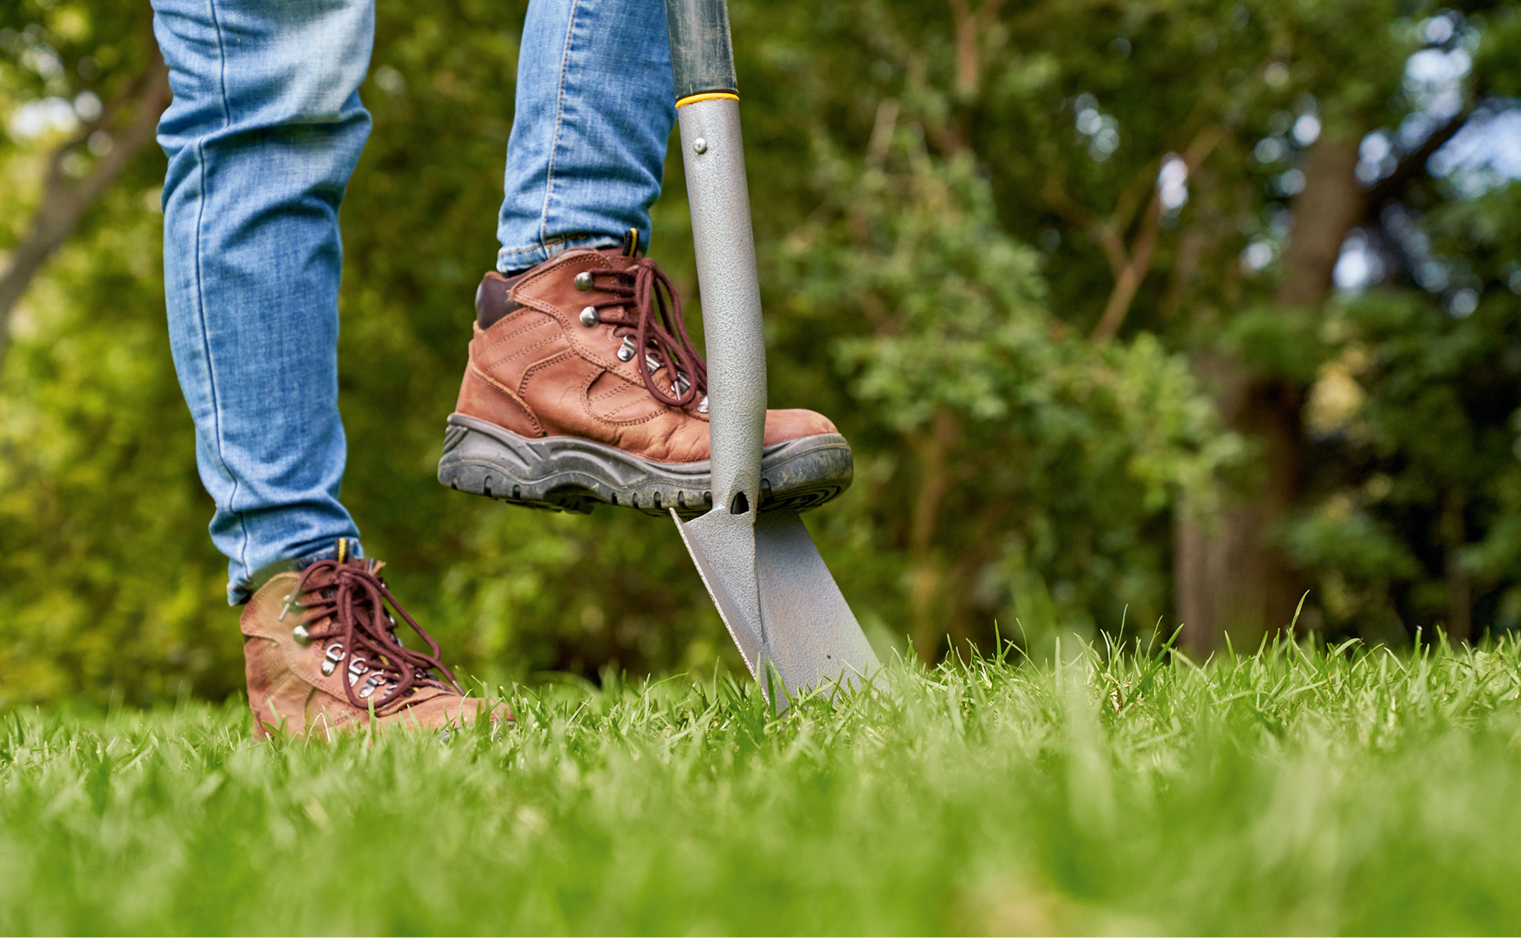 A Guide To Summer Lawn Care - STIHL Blog